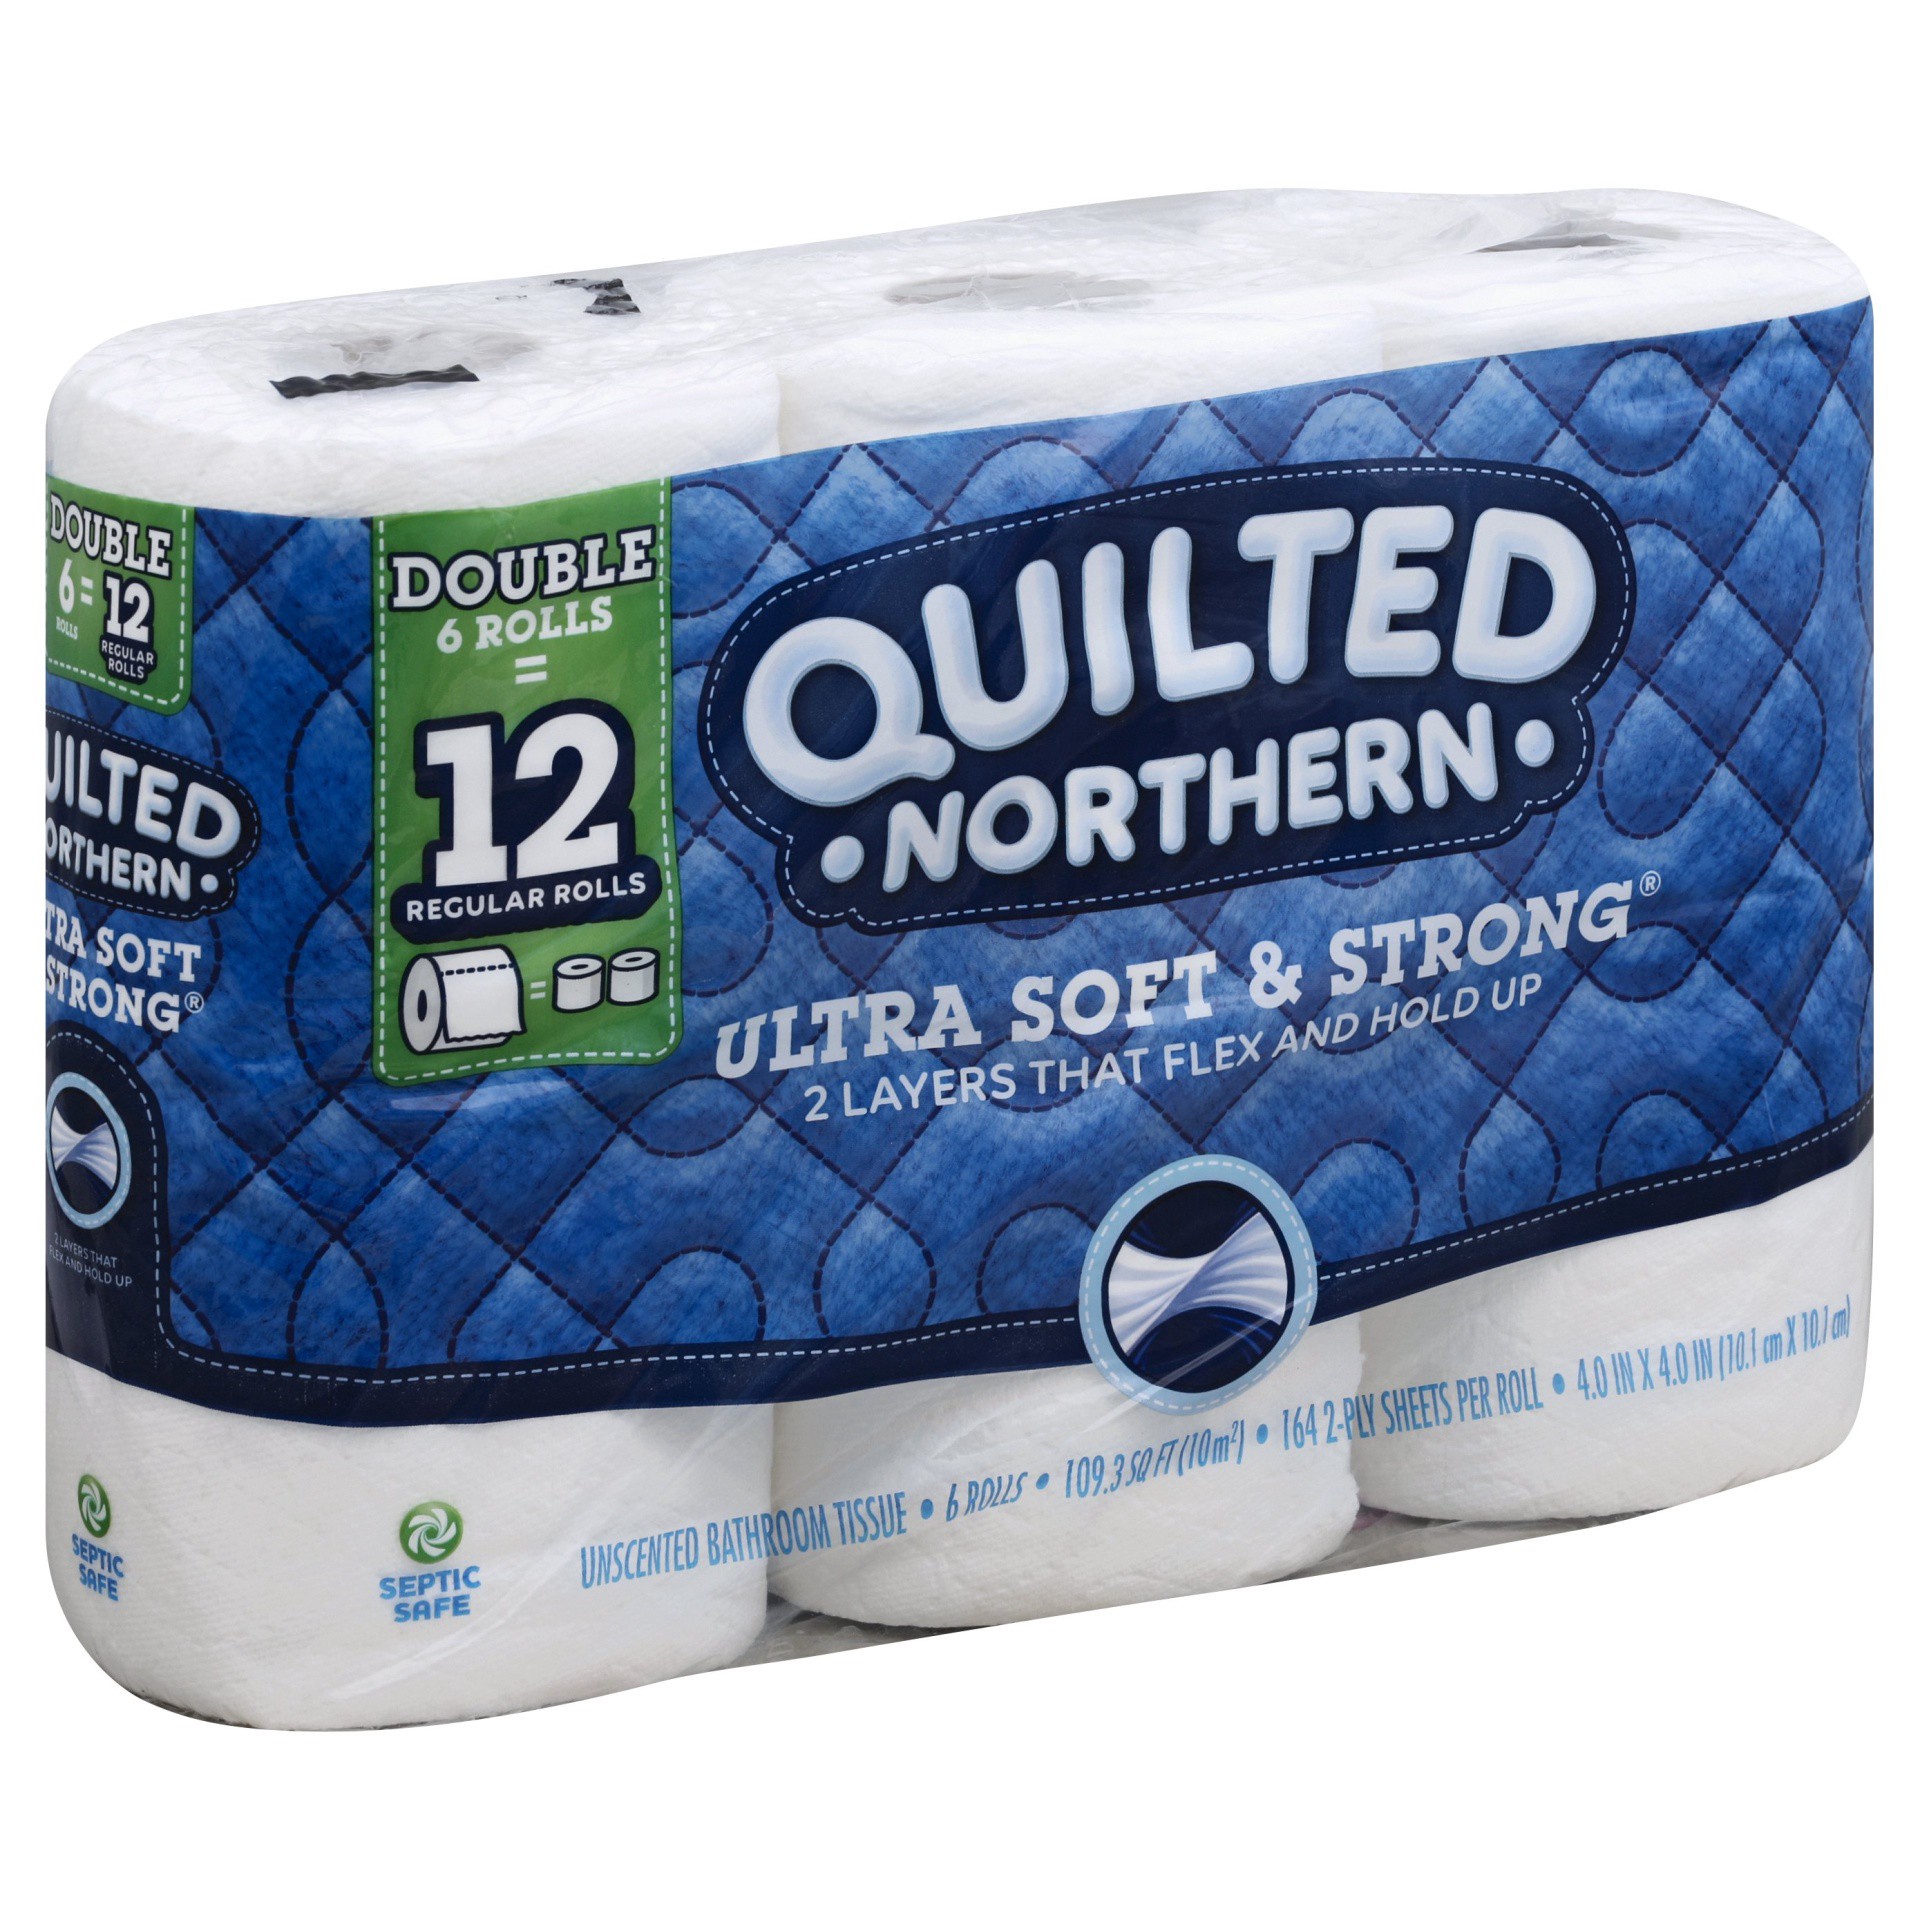 slide 1 of 8, Quilted Northern Ultra Soft & Strong Toilet Paper, Double Rolls, 6 ct